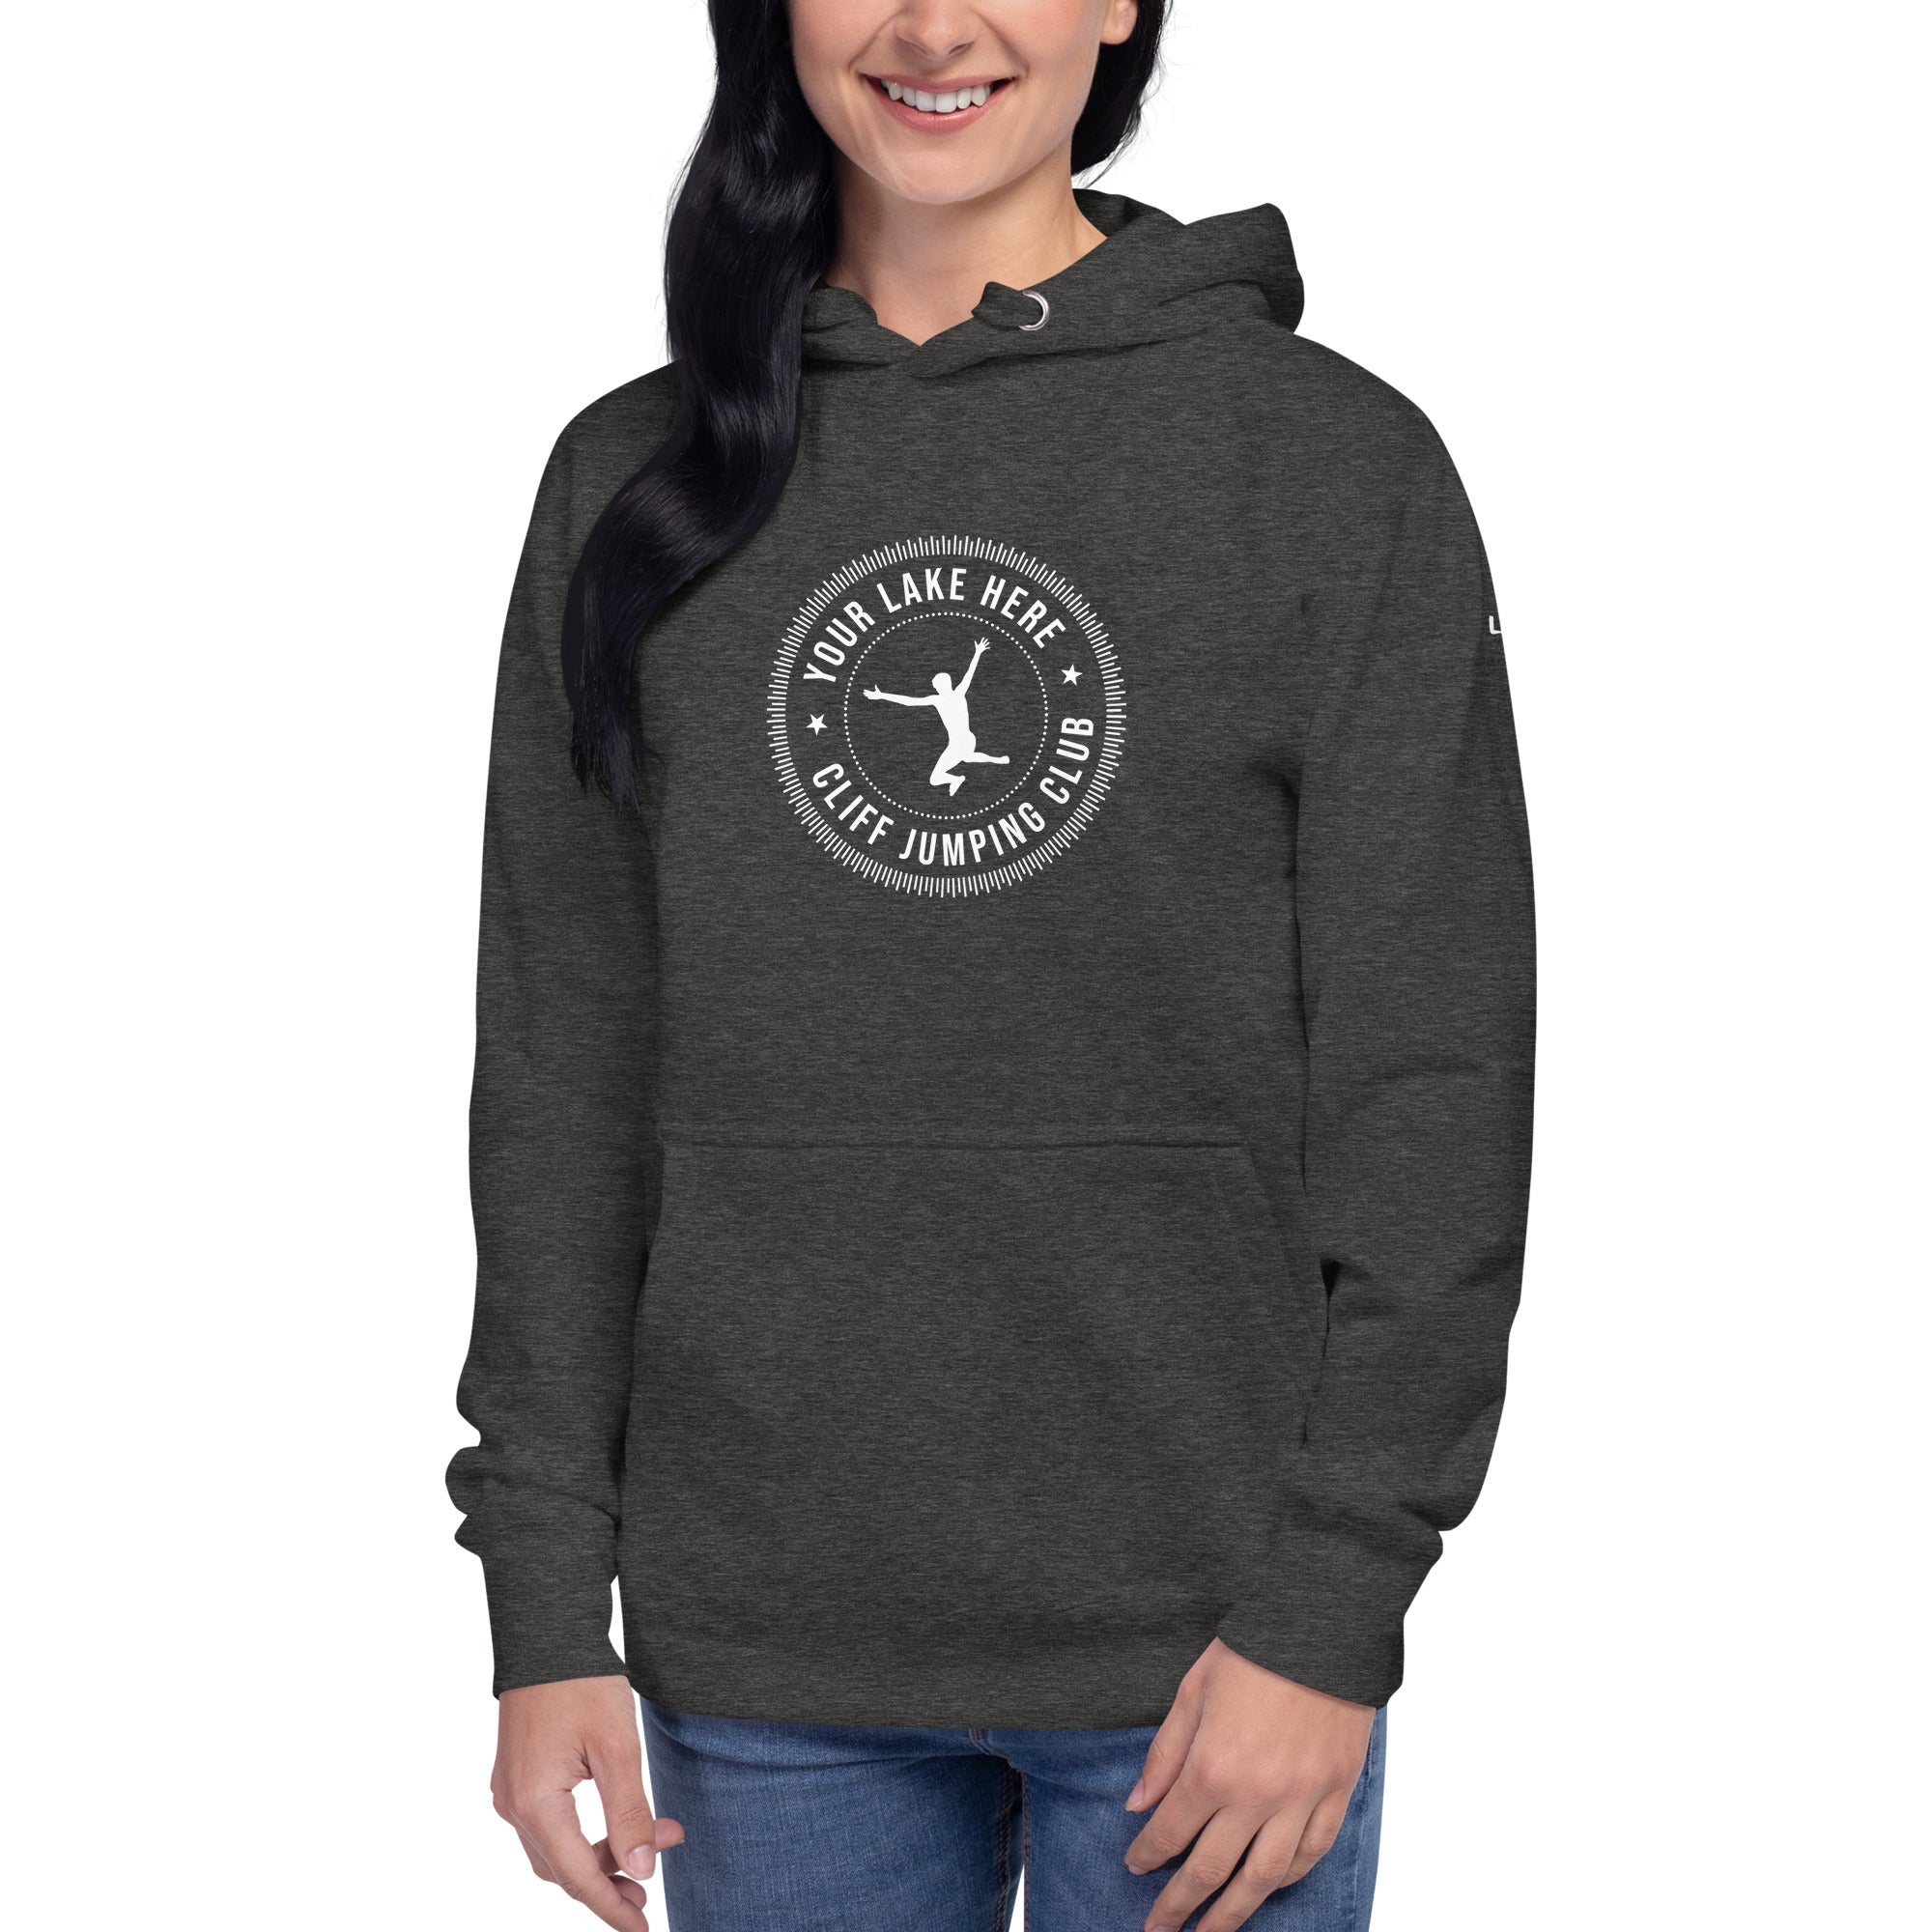 Personalized Cliff Jumping Hoodie (Your Lake Here!)